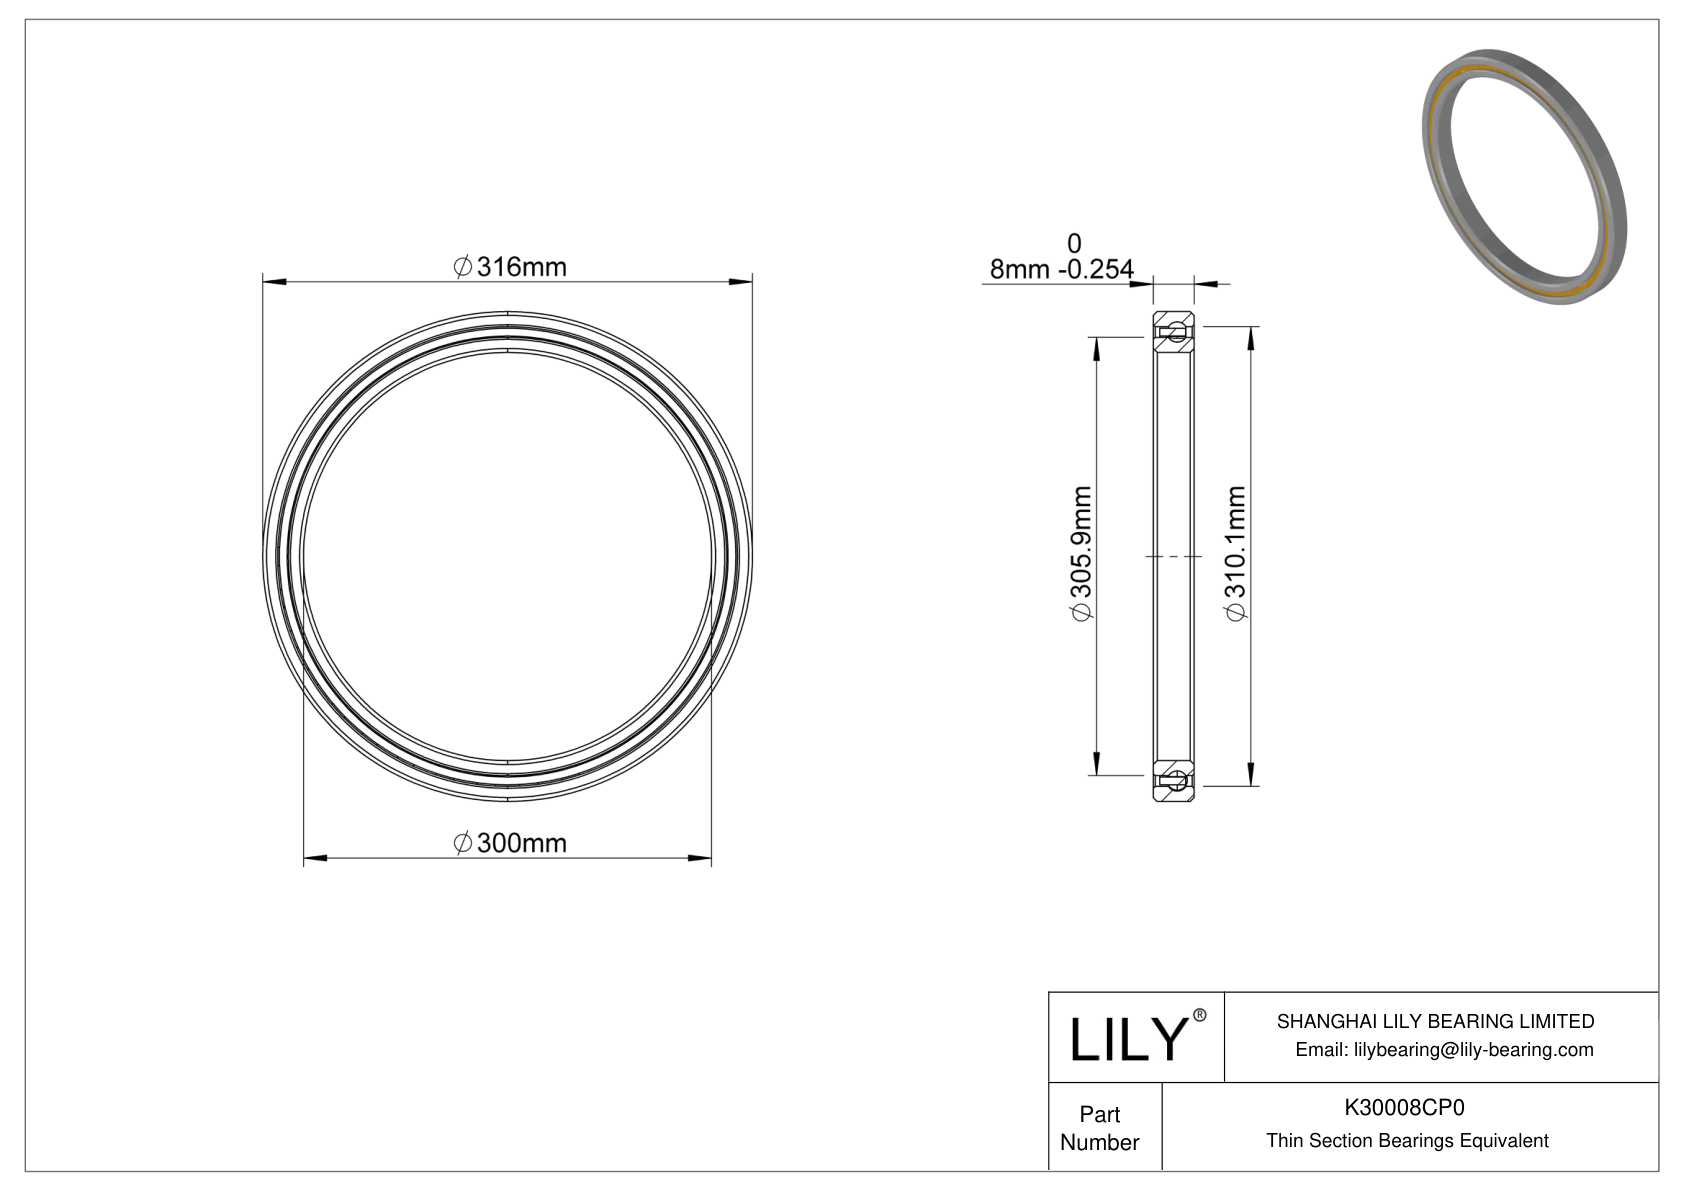 K30008CP0 Constant Section (CS) Bearings cad drawing